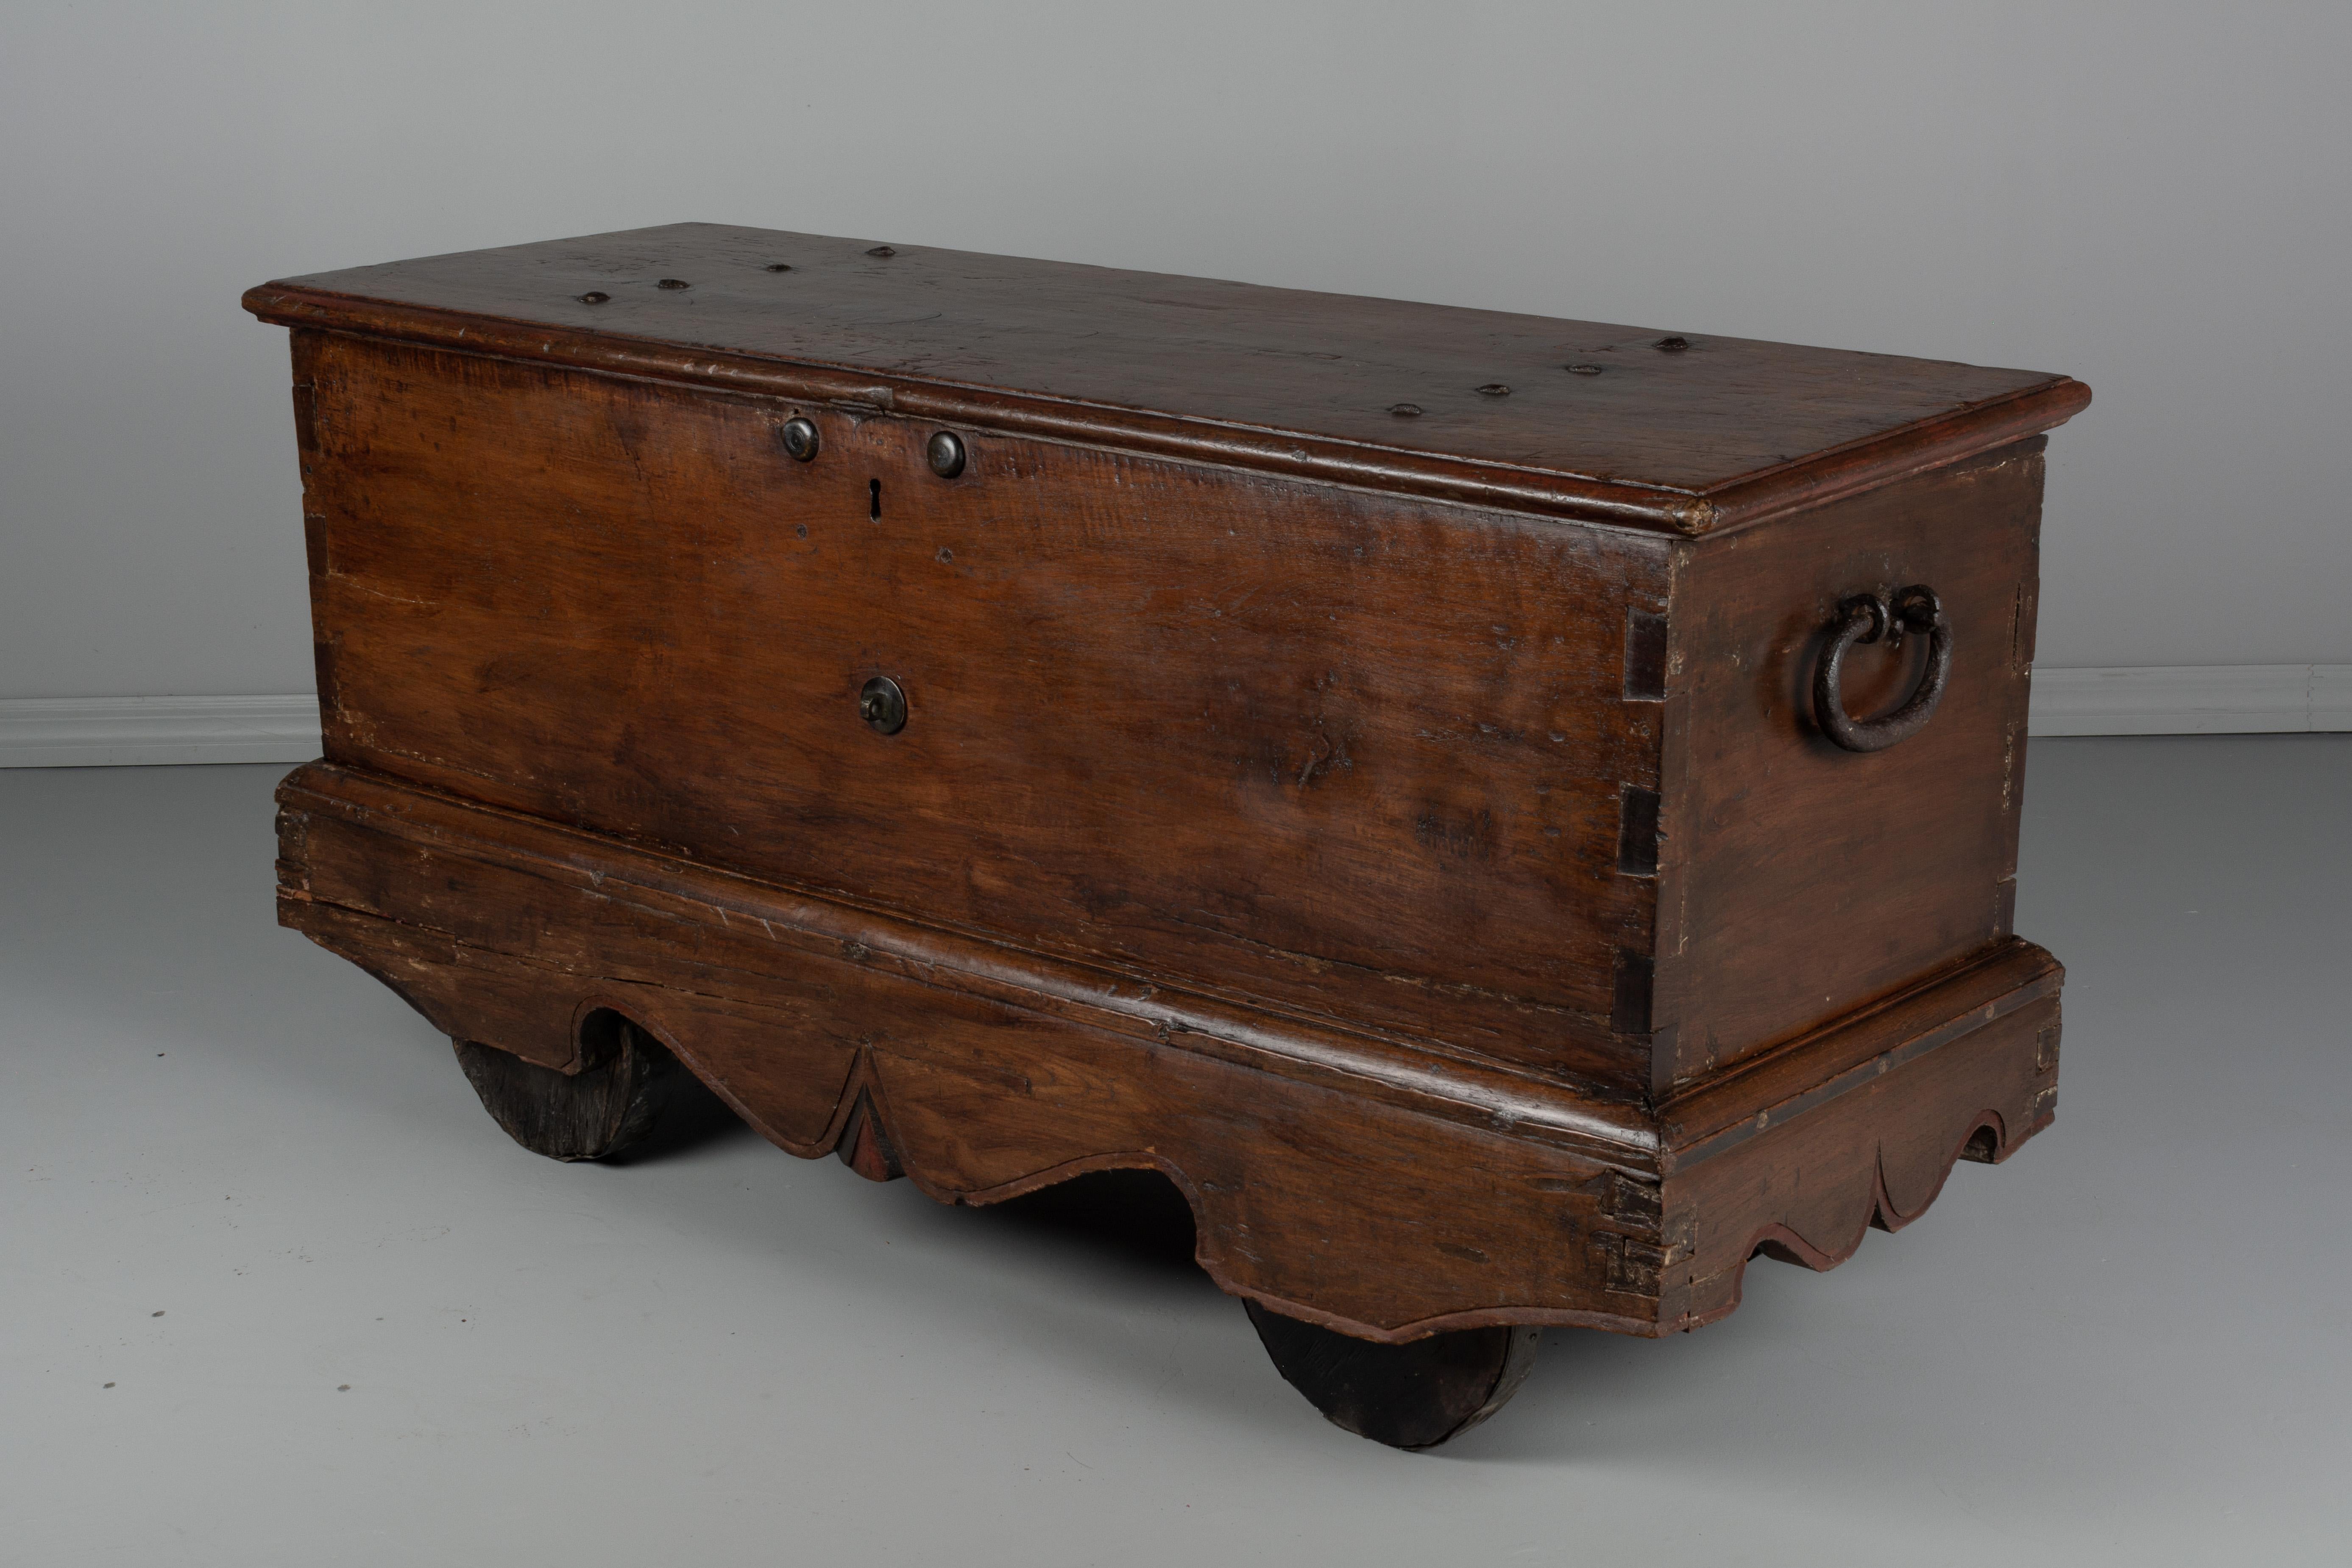 An early 18th century French coffer, or large trunk, made of solid planks of chestnut with dovetailed construction. Simple carved apron with remnants of red and black painted accents. Retains the original wooden wheels banded in metal. Large heavy